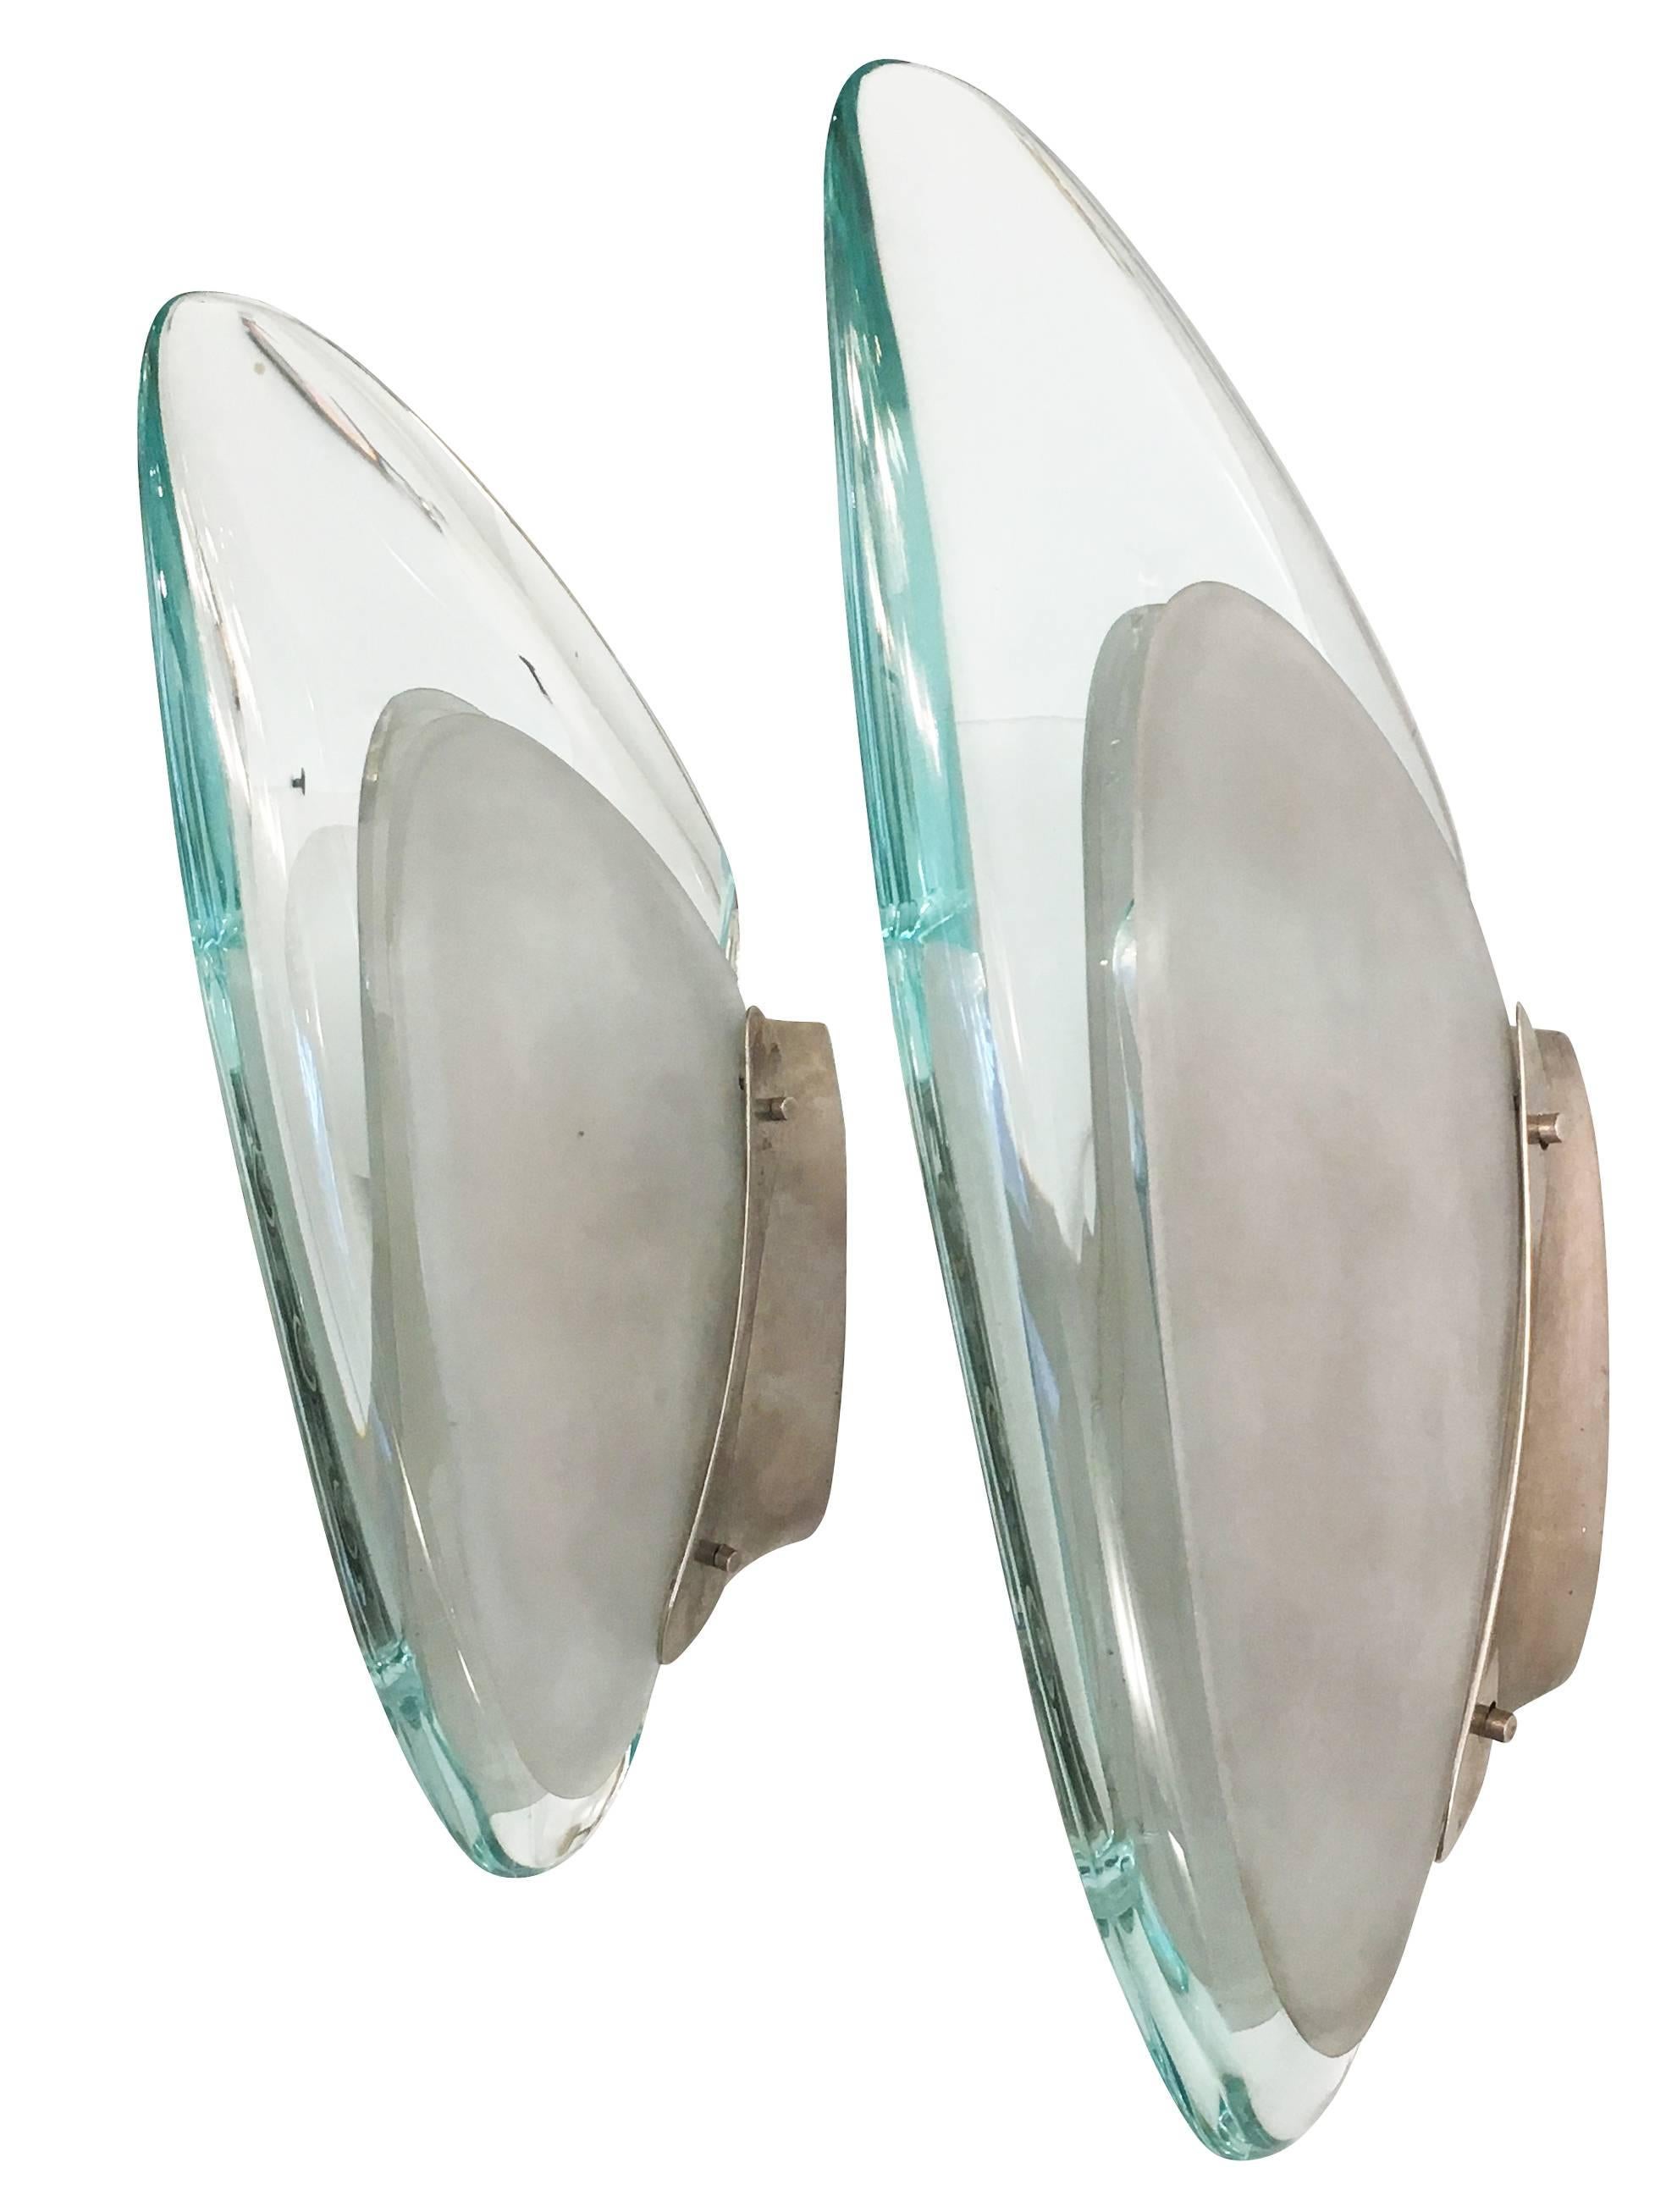 Stunning and rare wall lights model 1552 designed by Max Ingrand in 1956 for Fontana Arte. Each features a central curved glass flanked by two frosted glasses following the same shape. The frame is nickel plated brass and holds three candelabra